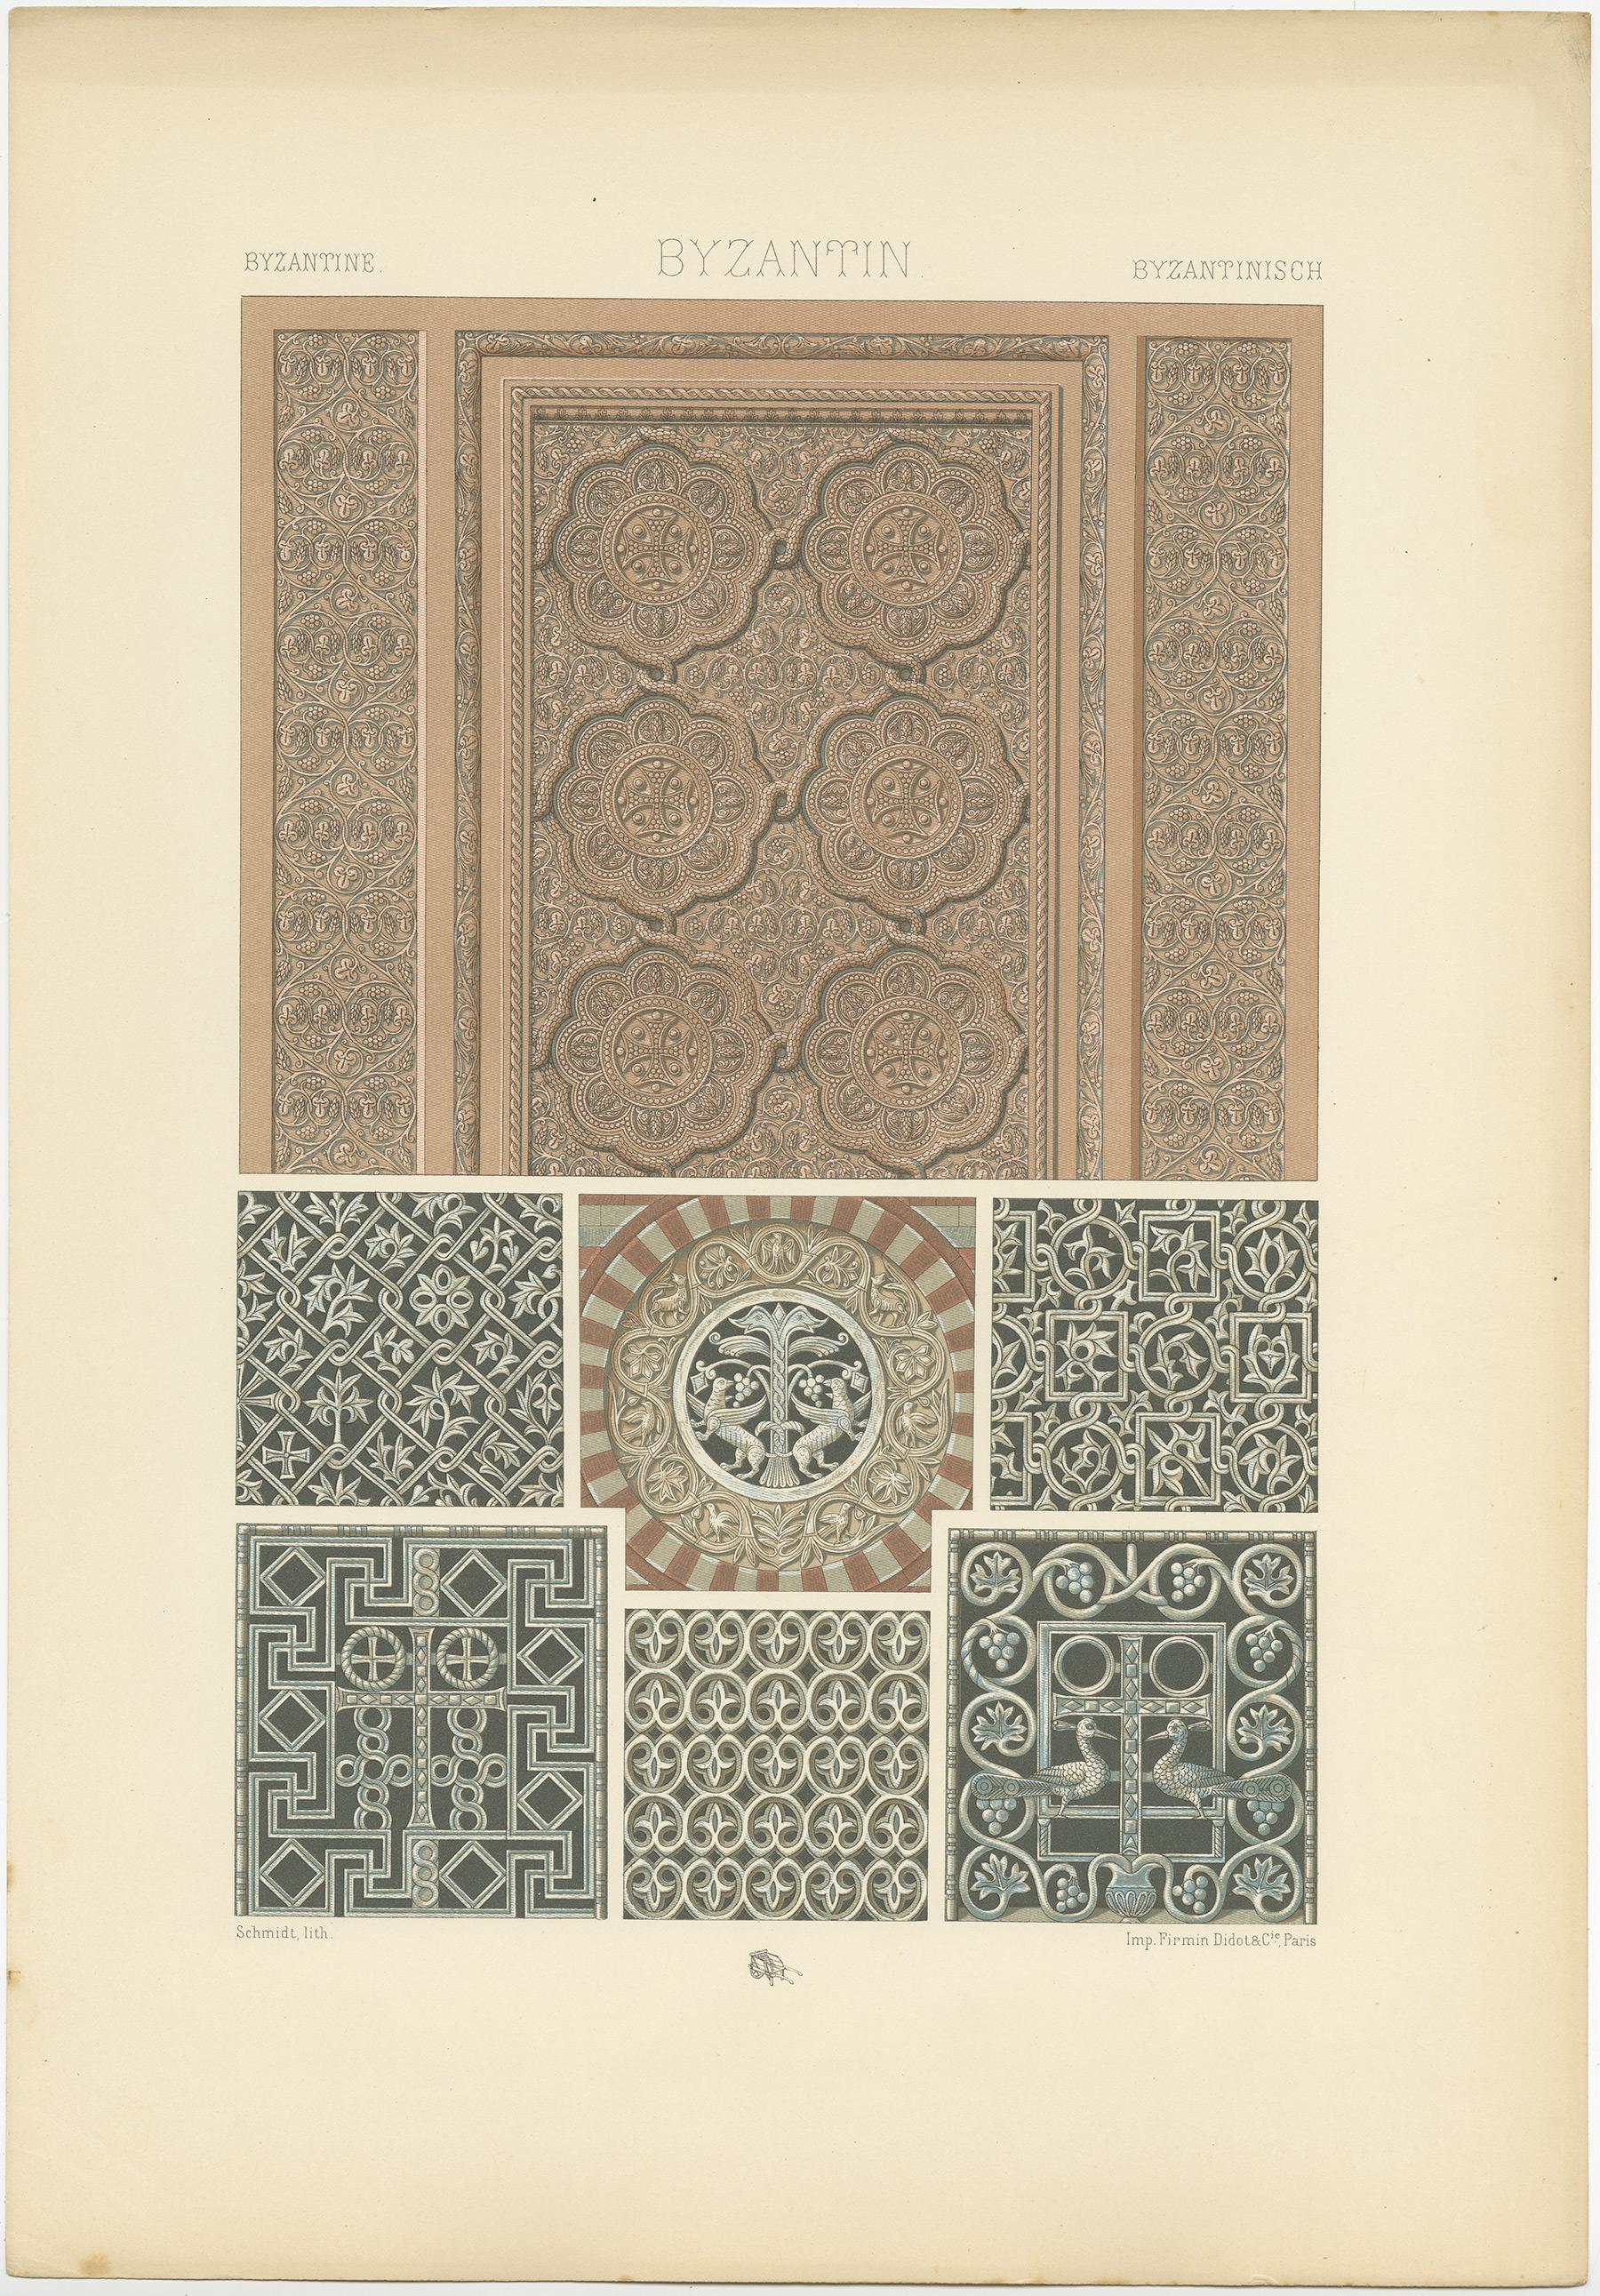 Antique print titled 'Byzantine - Byzantin - Byzantinisch'. Chromolithograph of Architectural motifs ,Egypt and Italiy, 6th century or earlier ornaments. This print originates from 'l'Ornement Polychrome' by Auguste Racinet. Published circa 1890.